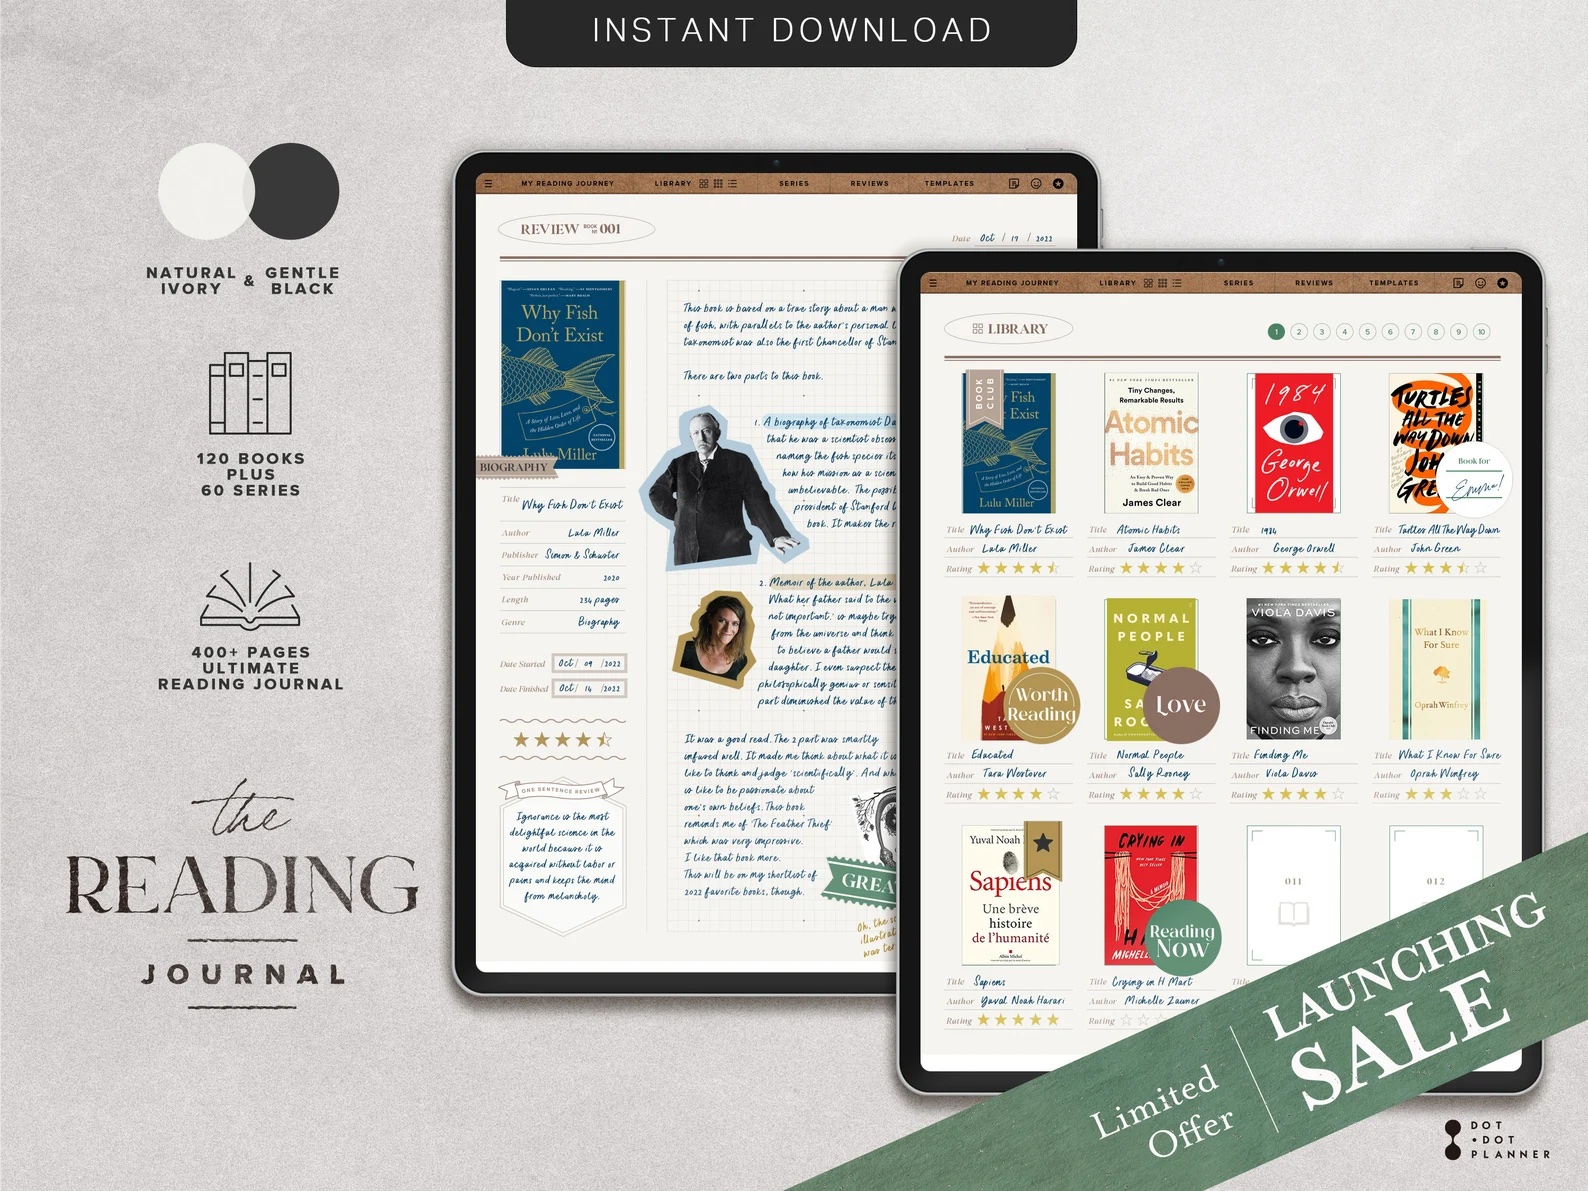 a graphic of an illustration of an iPad featuring a digital reading journal that includes pre-made spreads for readers to keep track of their reading on their iPad.